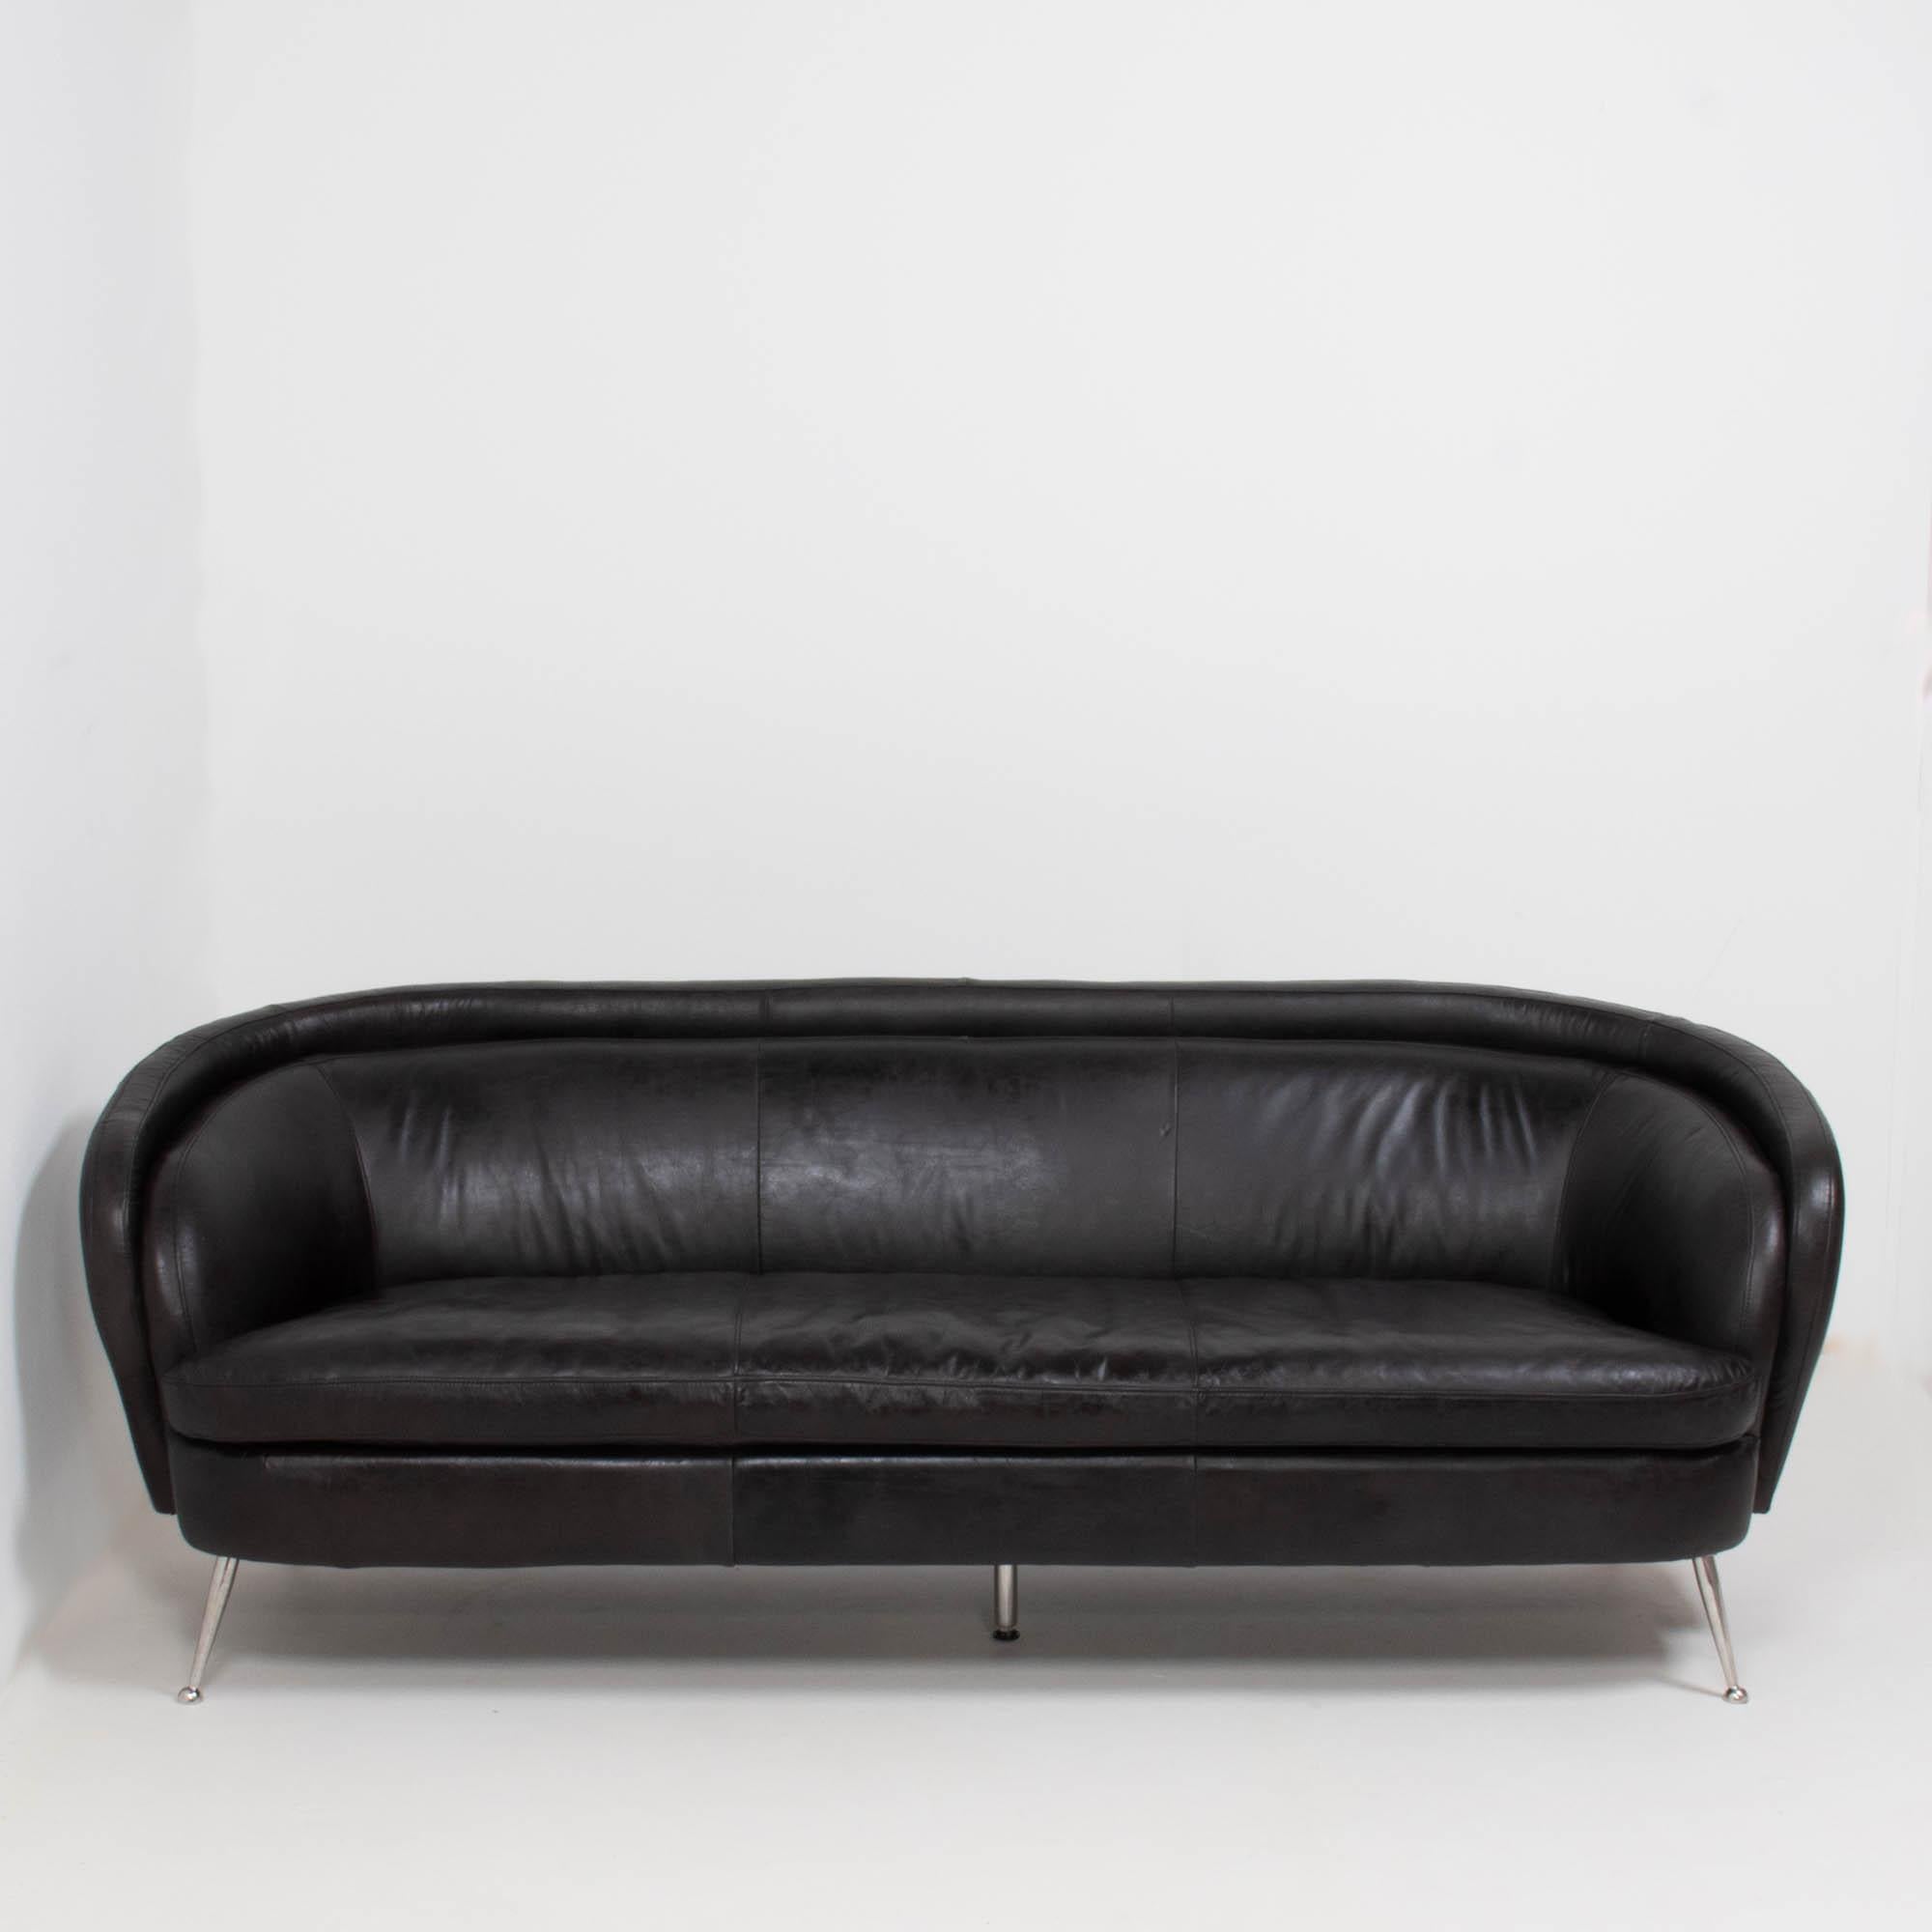 Beautifully curved, this 1960s vintage sofa is upholstered in black leather and sits on chrome stiletto legs with an additional central support.

The back of the sofa is curved, creating a striking silhouette. The single back cushion, follows the